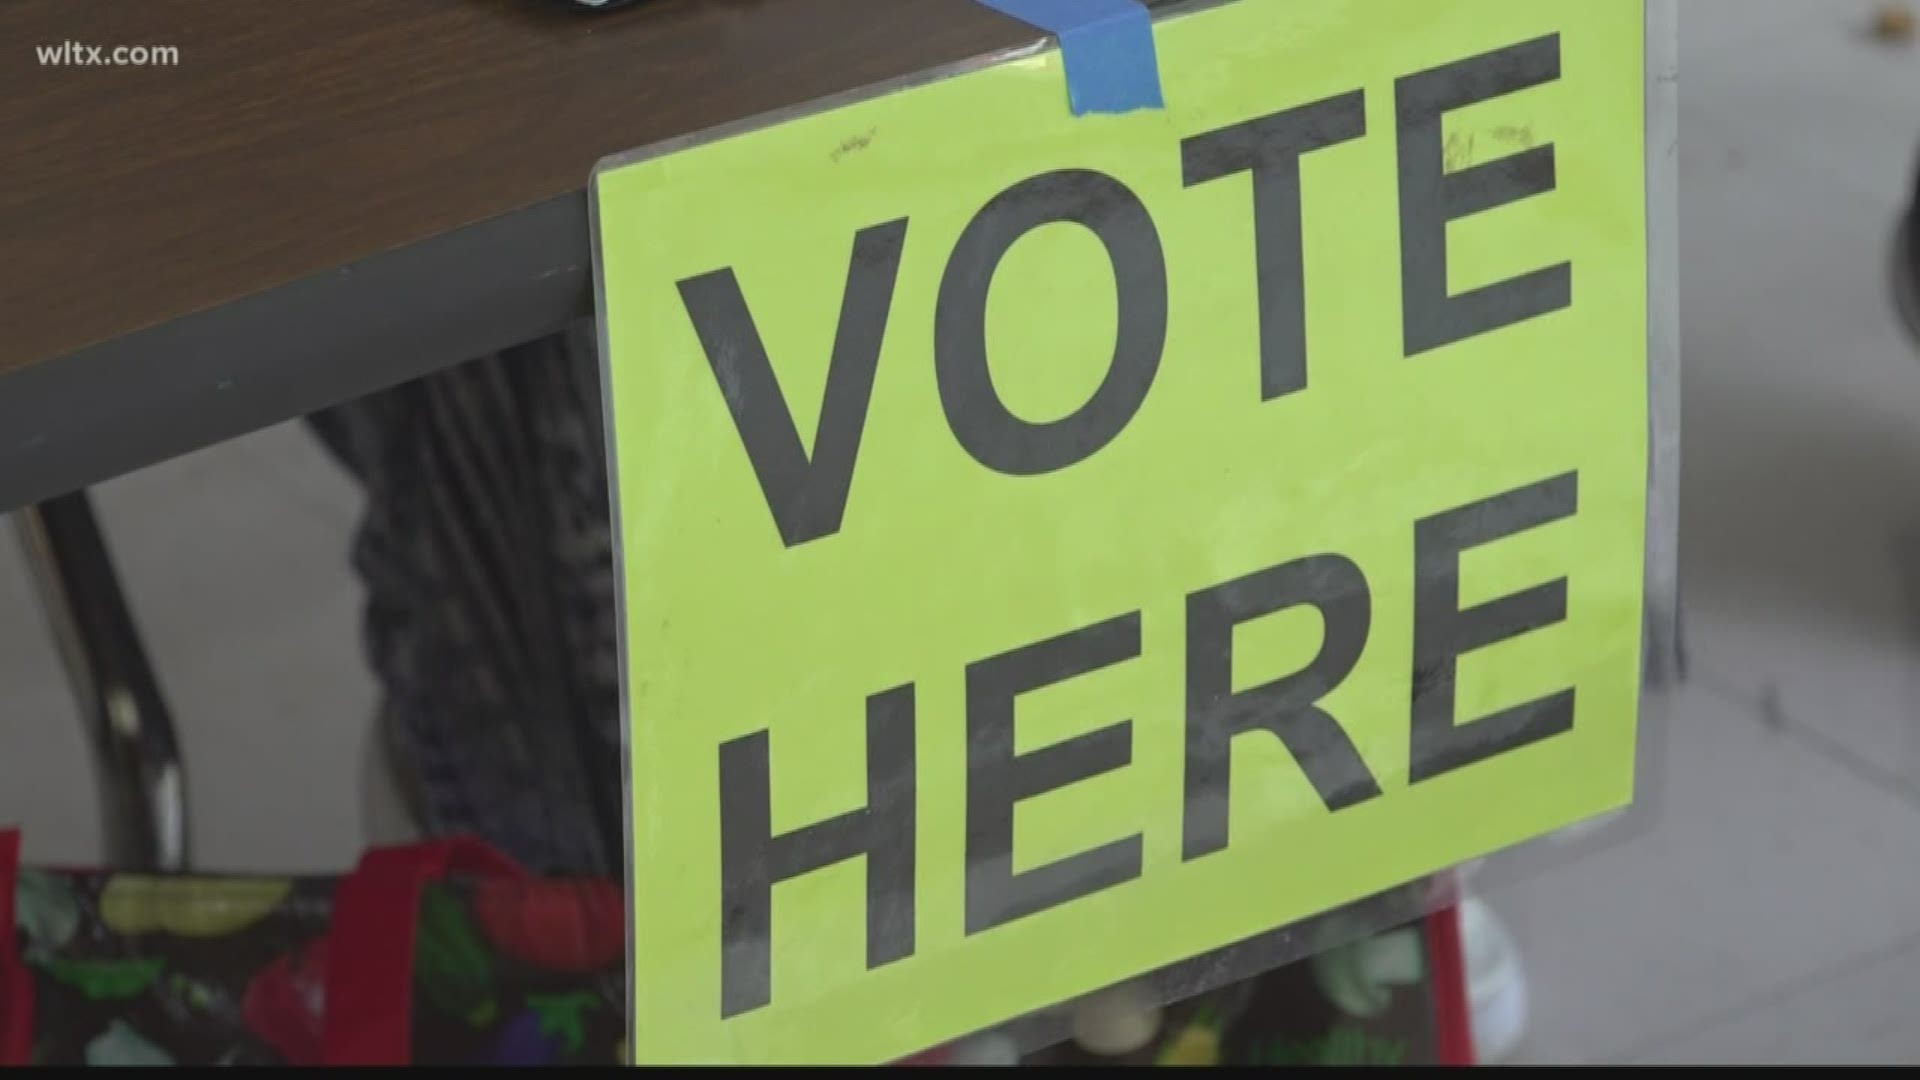 Today Orangeburg is holding elections for three county council districts.